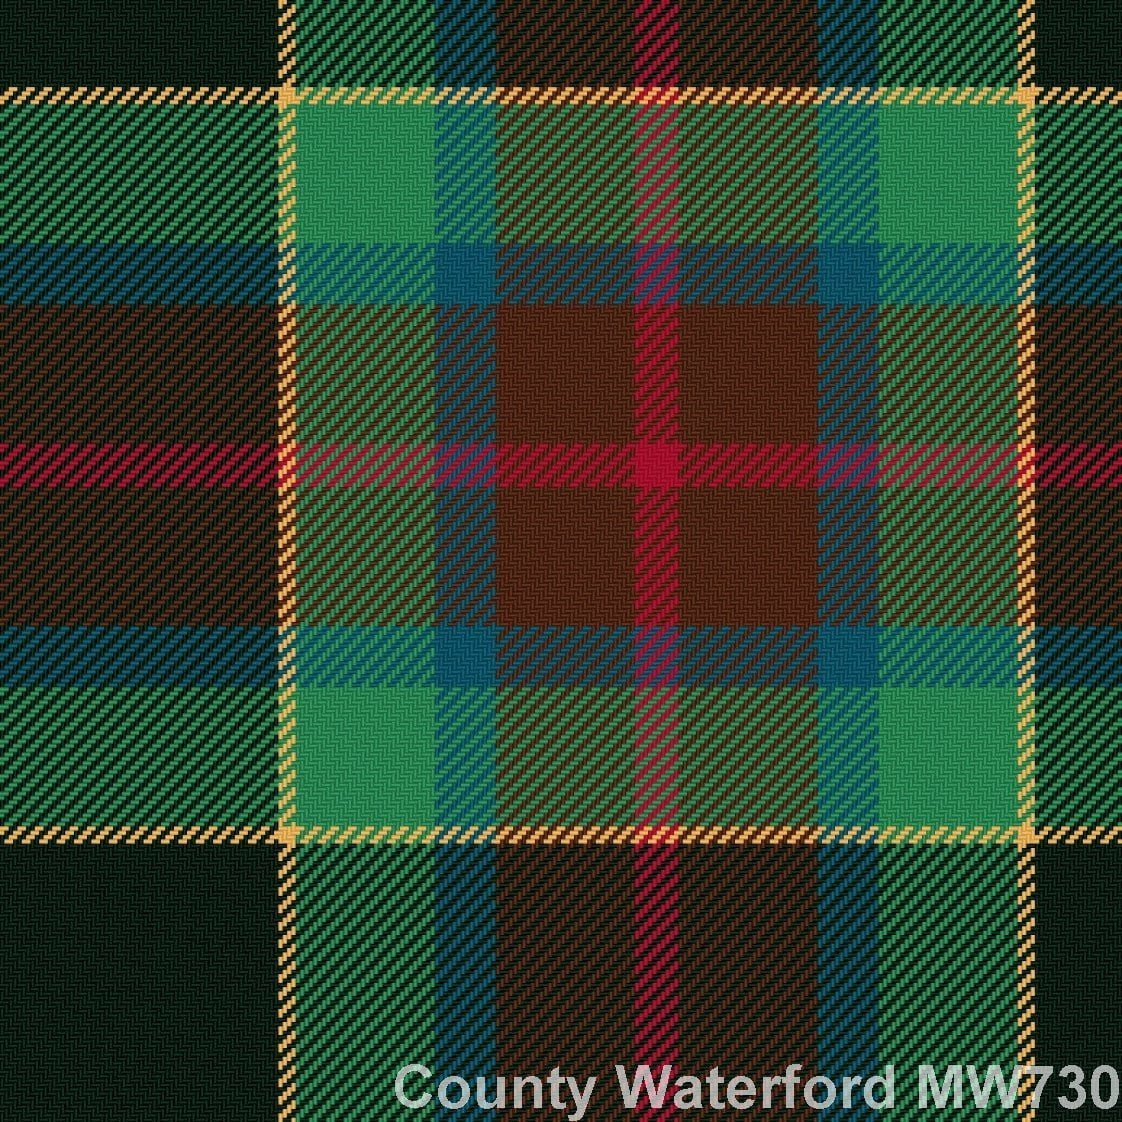 Waterford County